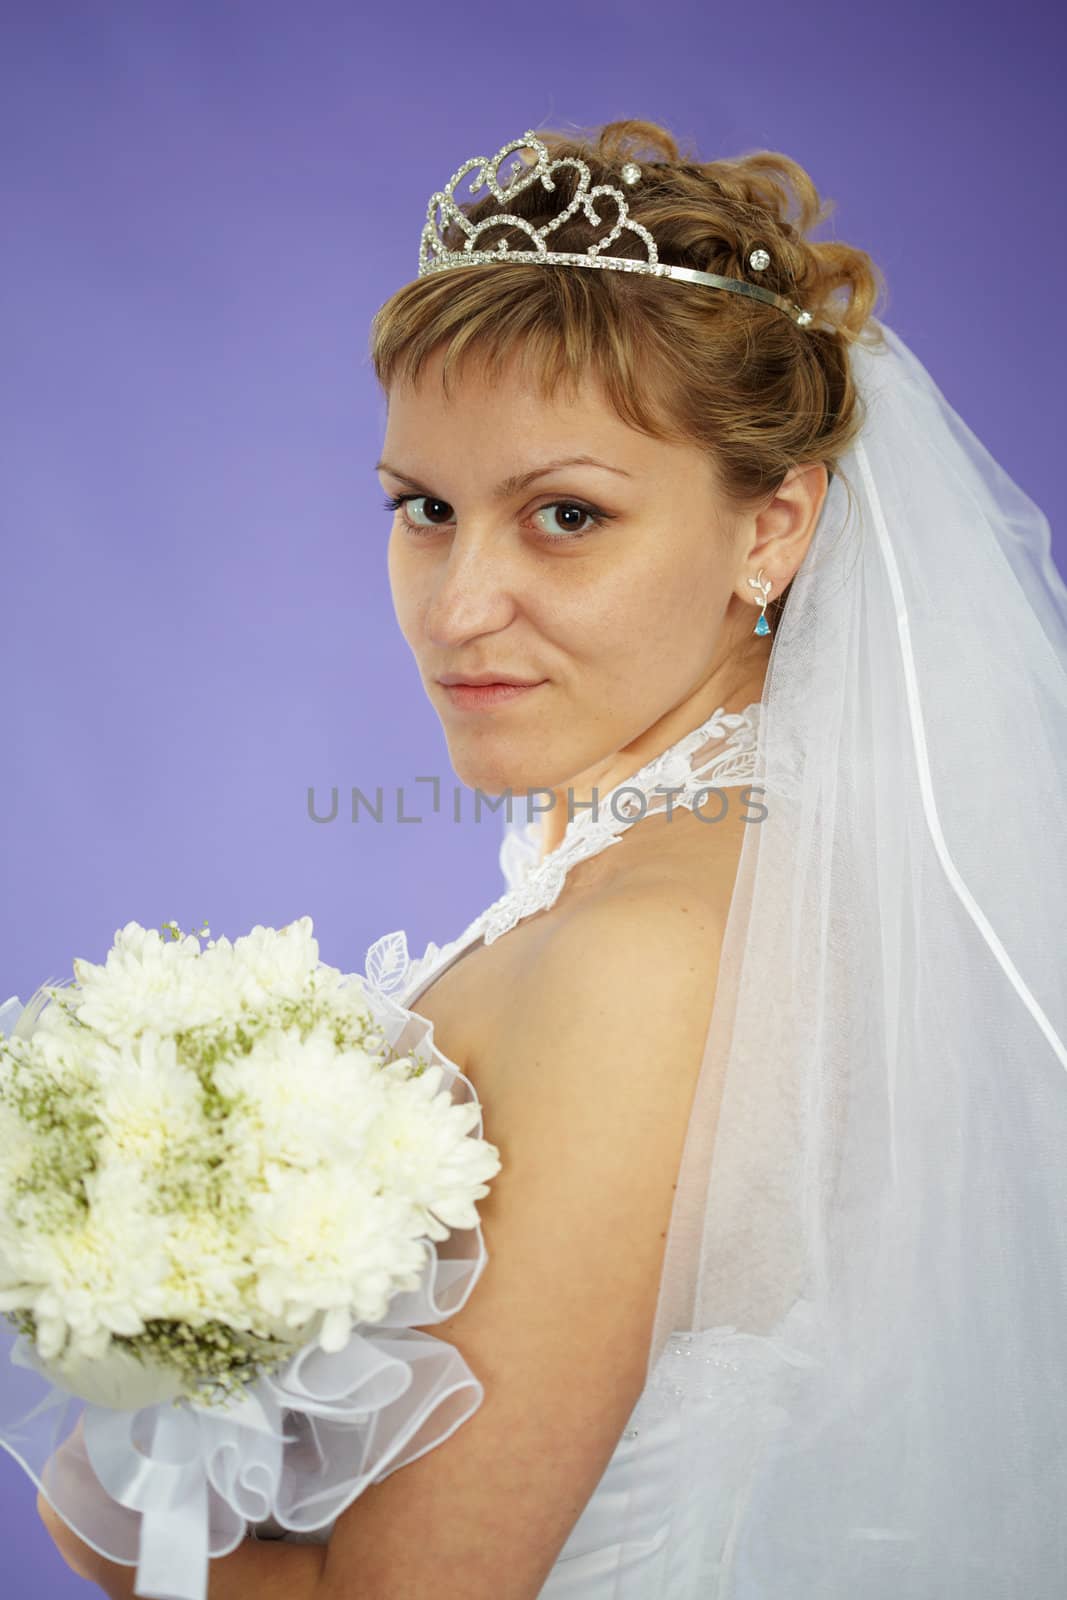 The bride looks at us - a portrait on a purple background